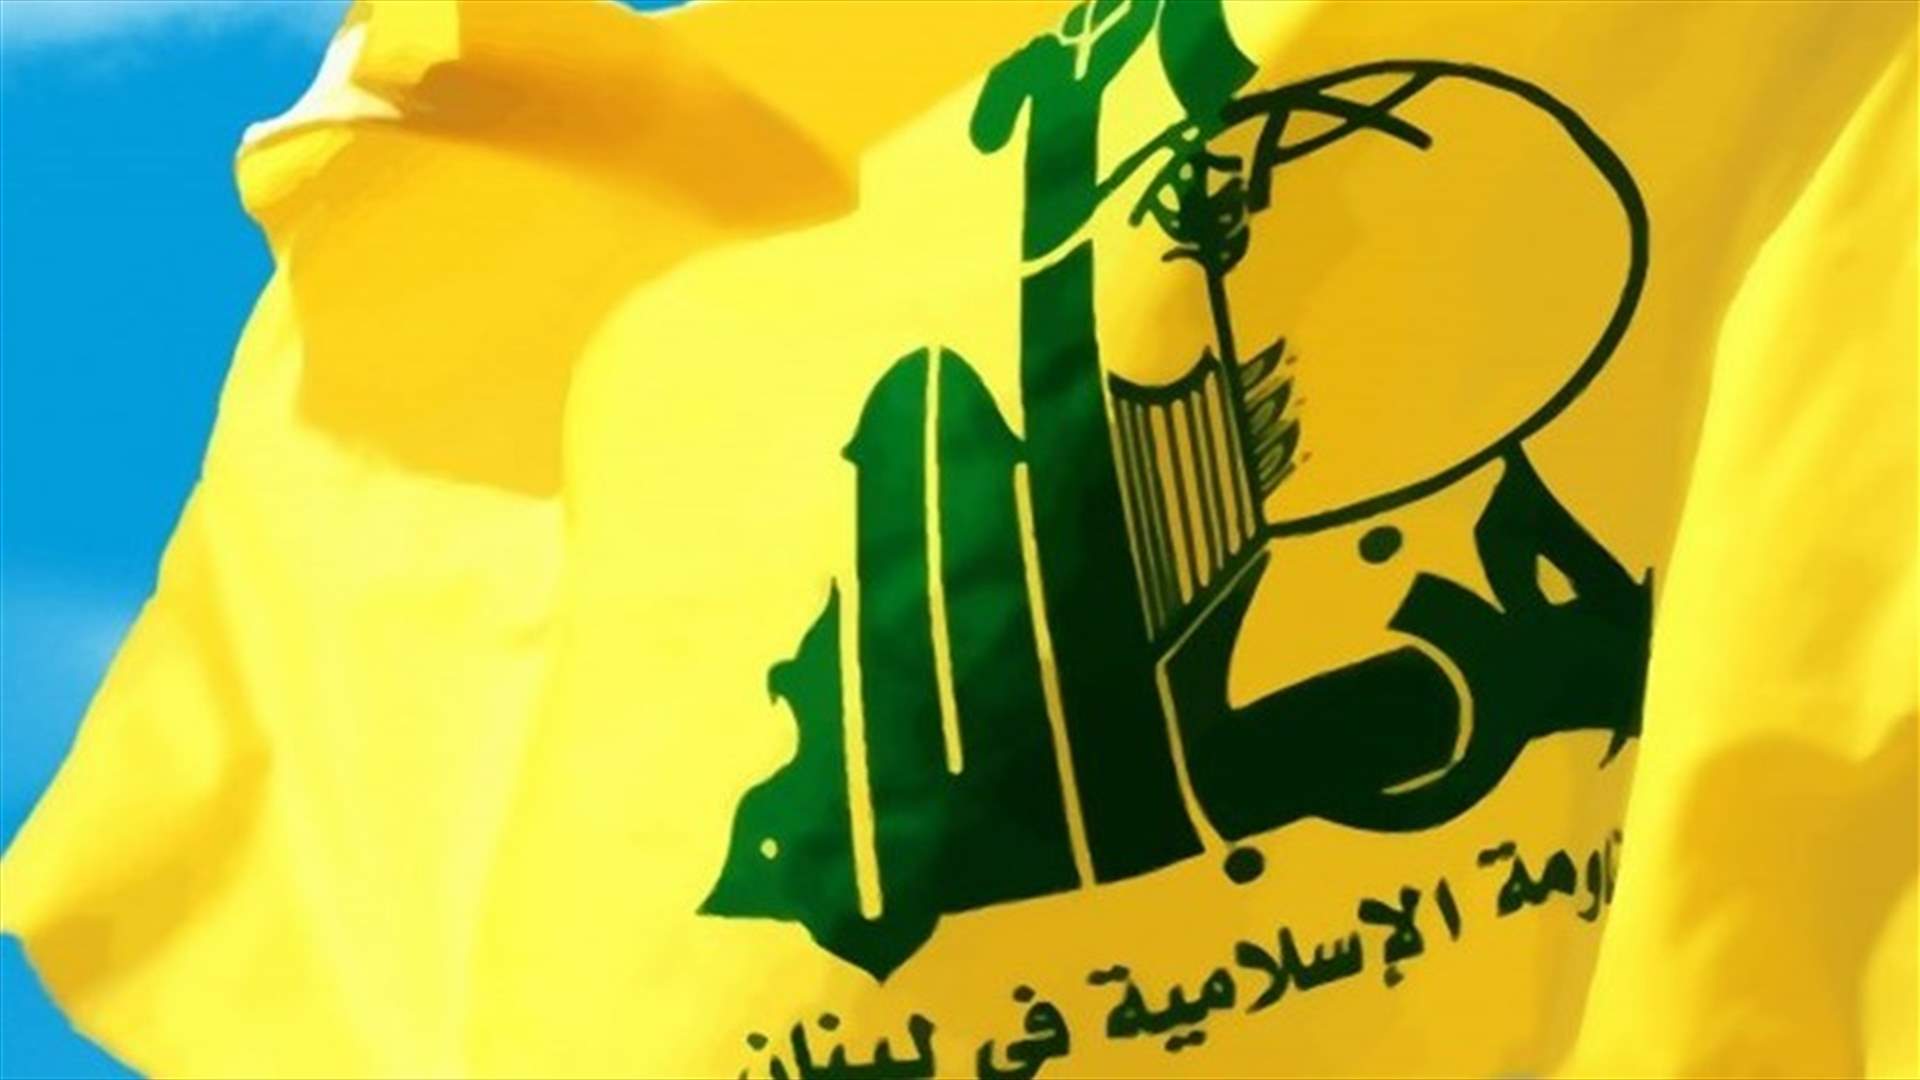 Hezbollah condemns Damascus twin bombing, calls for joint efforts to eradicate terrorism